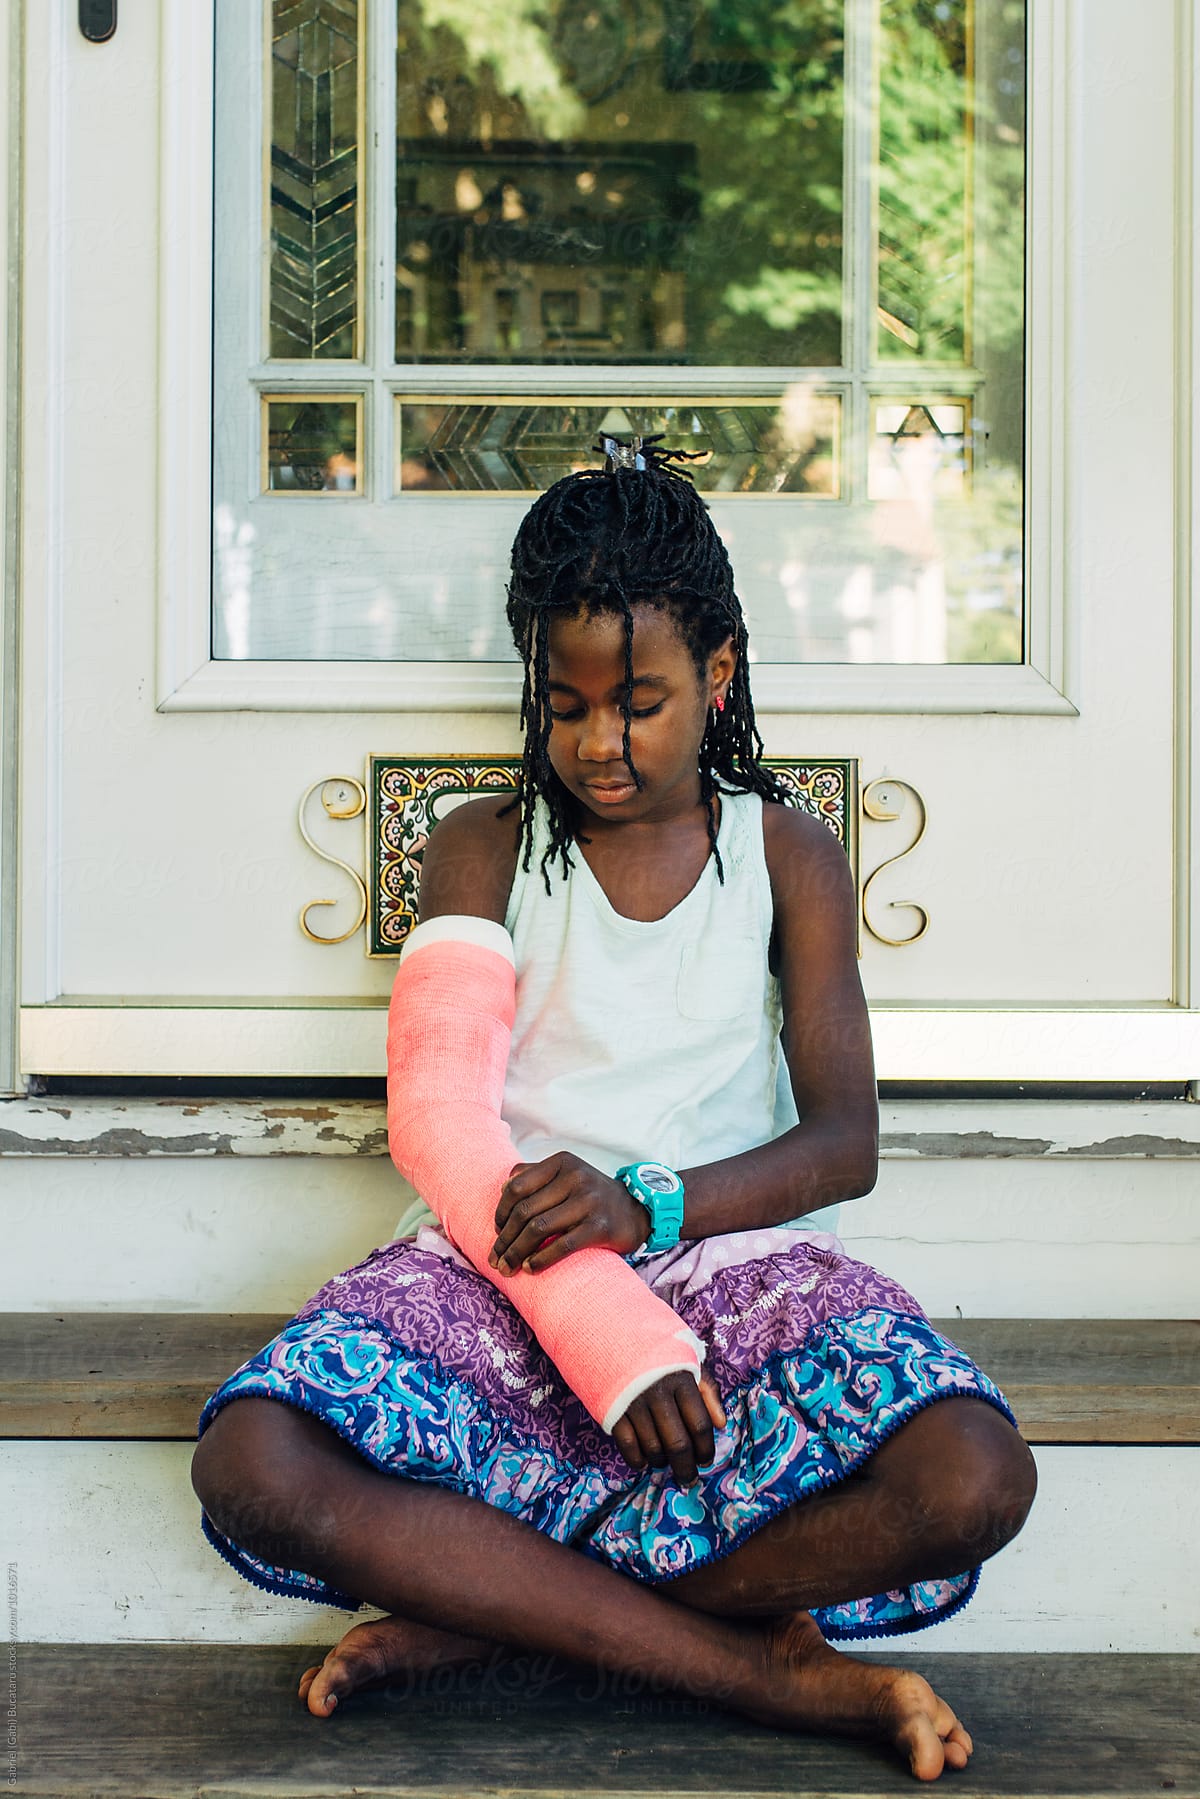 Black Girl Looking At Her Pink Cast By Stocksy Contributor Gabi